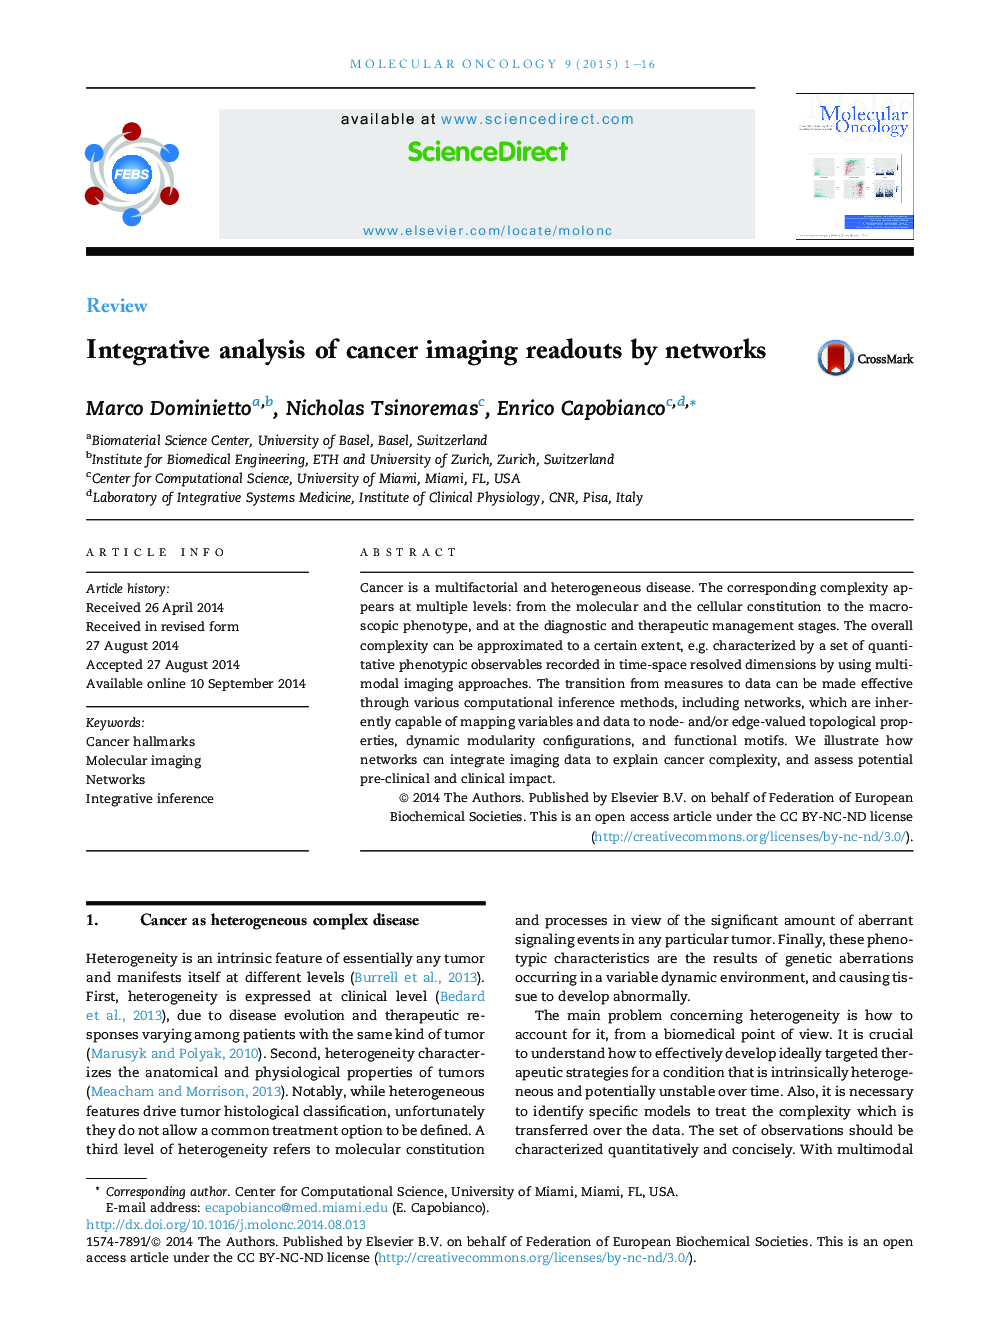 Integrative analysis of cancer imaging readouts by networks